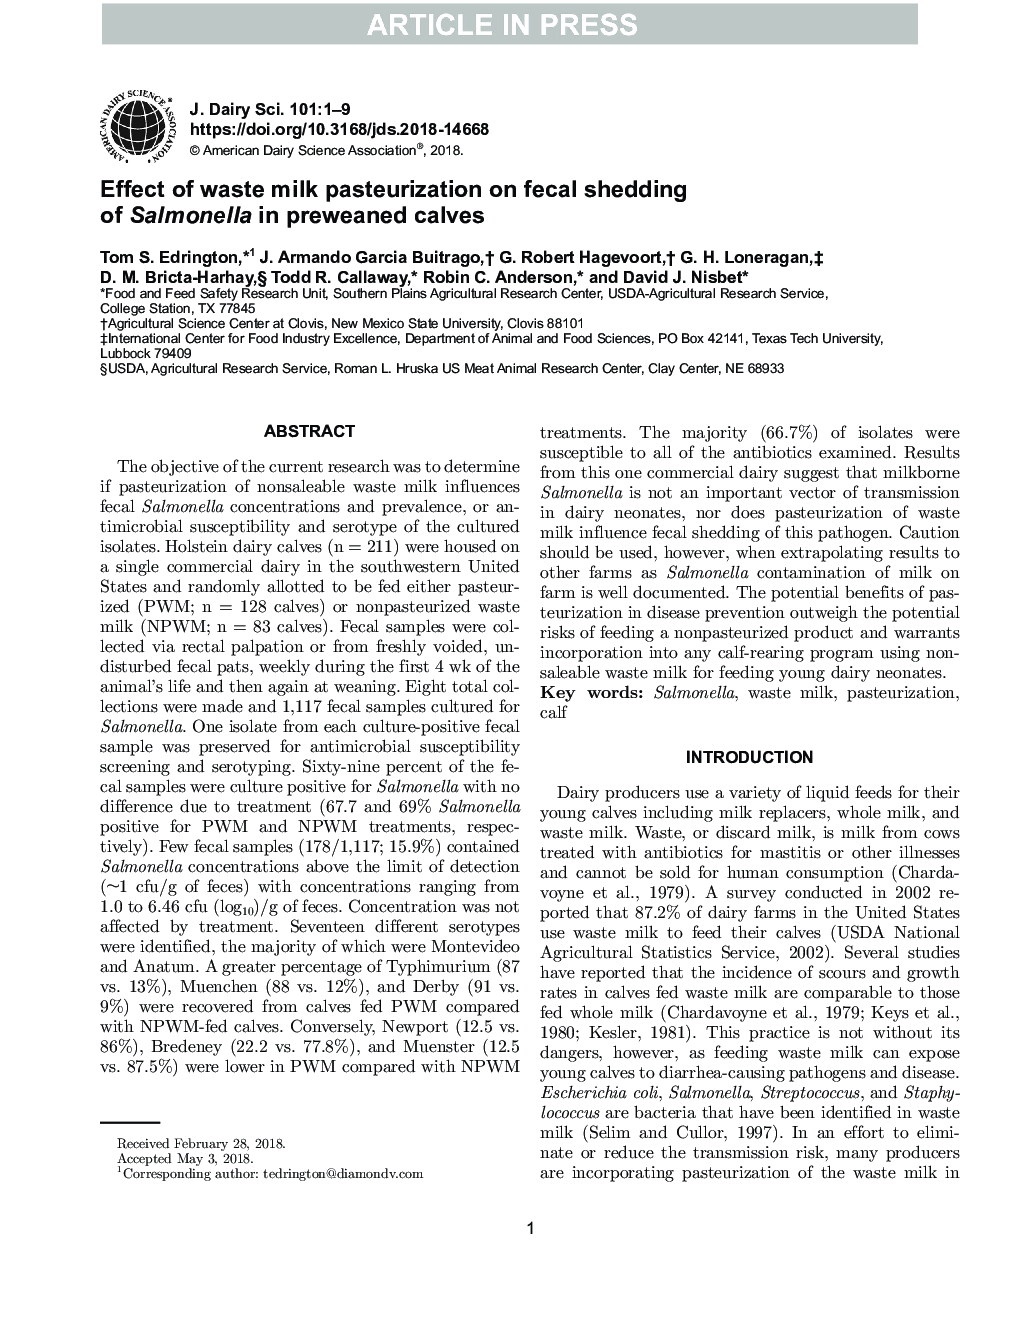 Effect of waste milk pasteurization on fecal shedding of Salmonella in preweaned calves